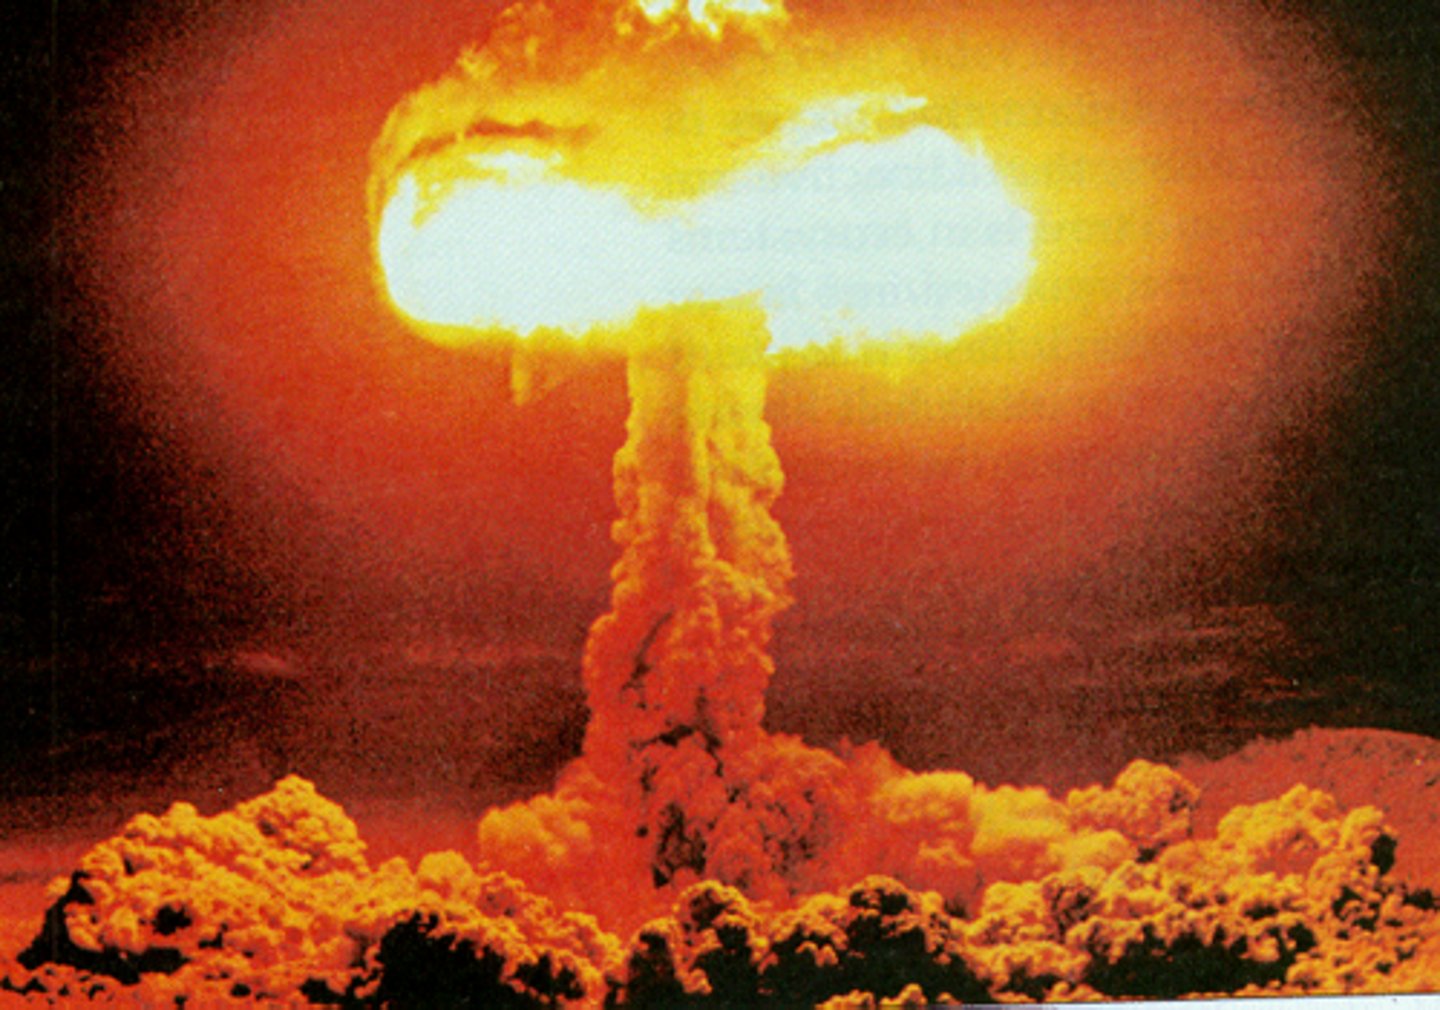 <p>A "fission" bomb dropped on Nagasaki and Hiroshima at the end of World War II.</p>